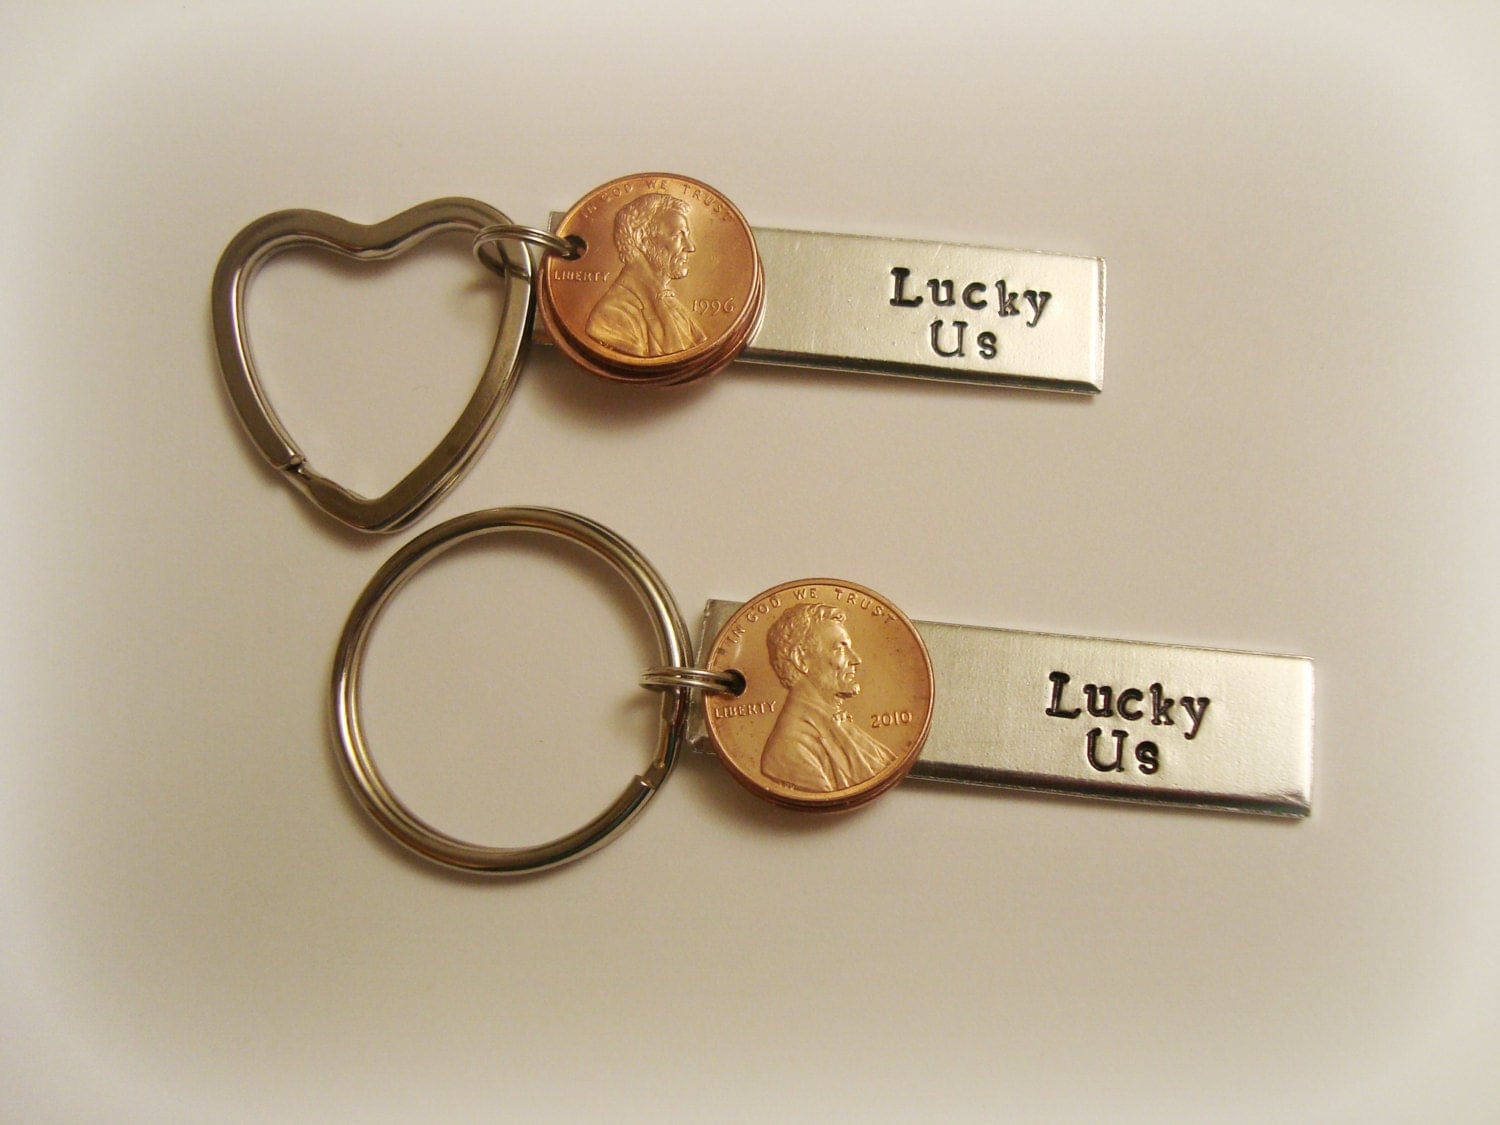 Personalized Penny Hand Stamped Key Chain with Lucky Penny/Pennies with Special Year